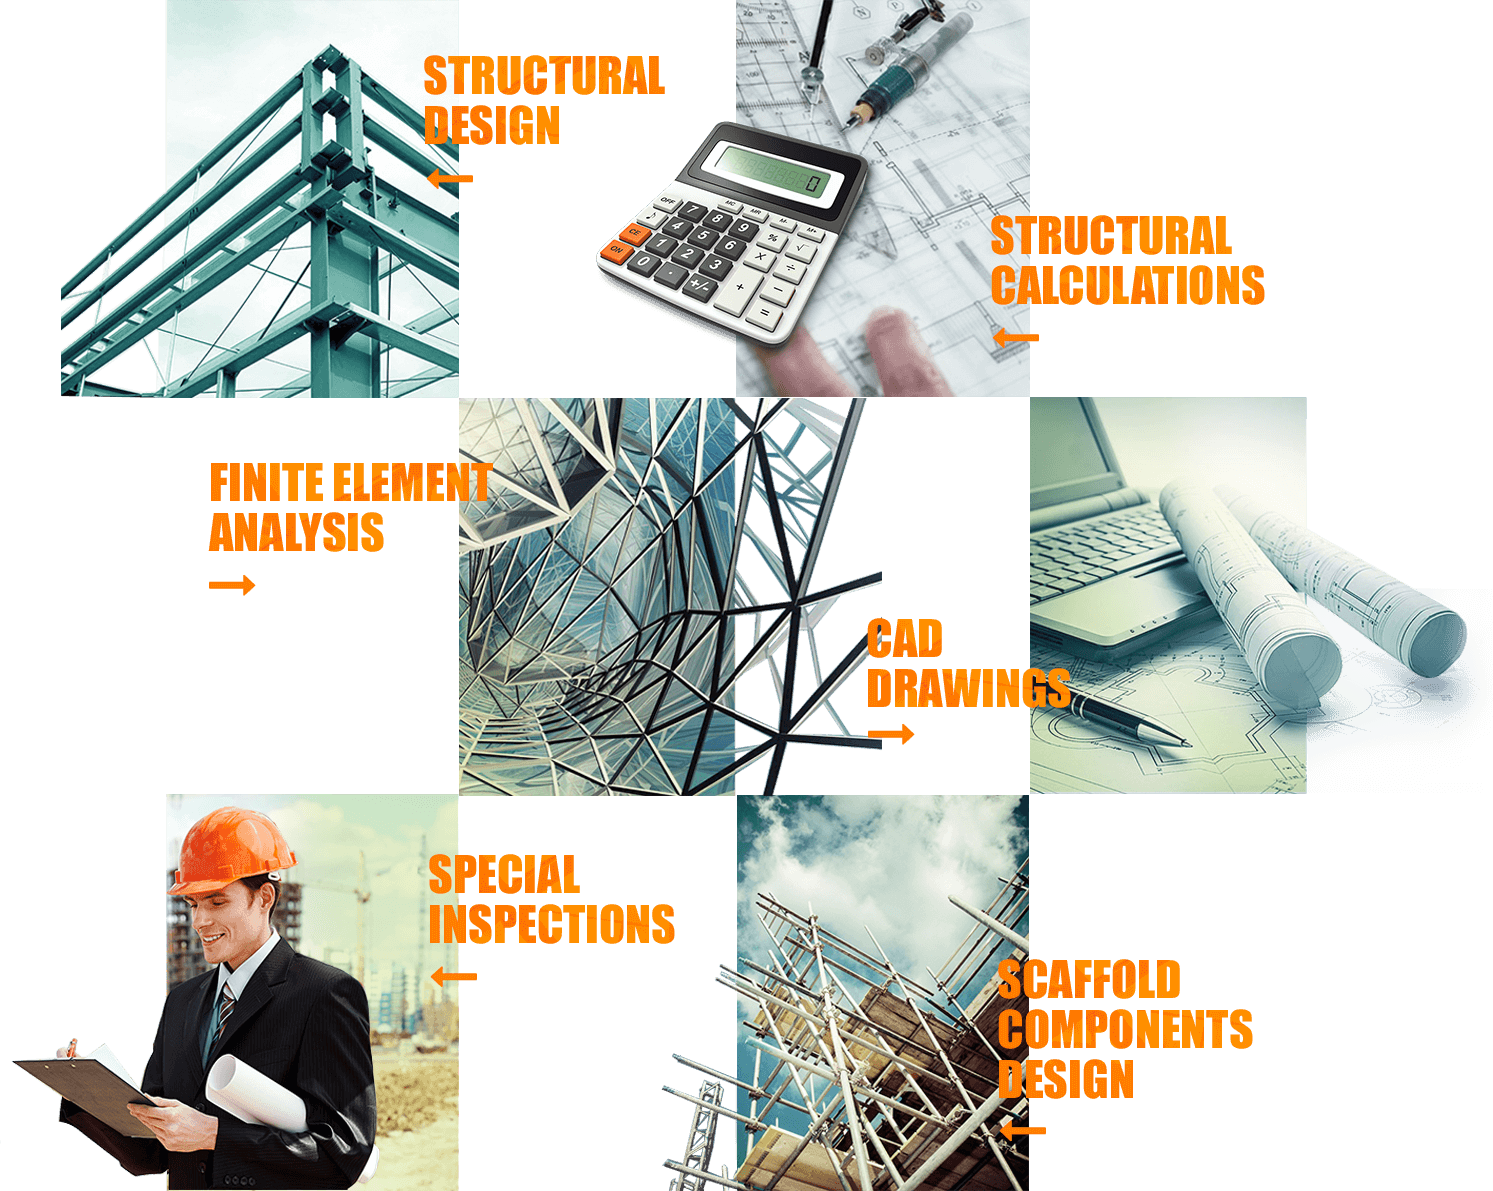 structural design, structural calculations, finite element analysis, cad drawings, special inspections, scaffold componenets design